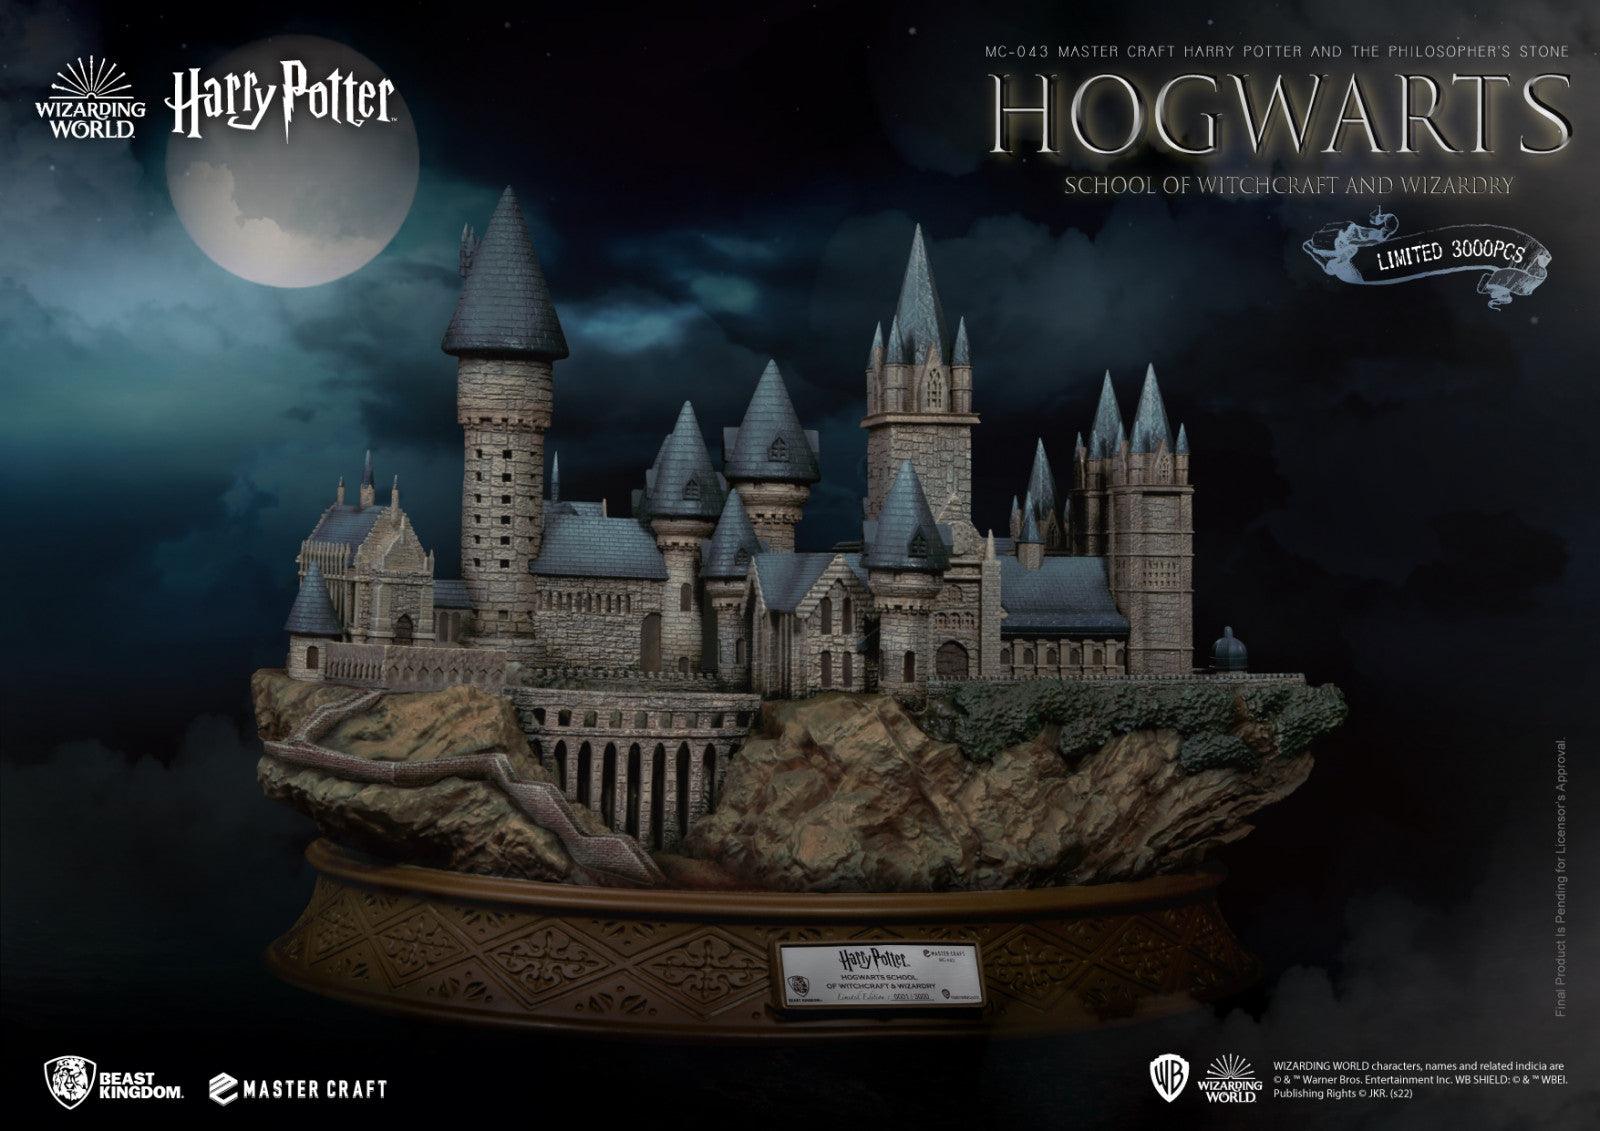 VR-103956 Beast Kingdom Master Craft Harry Potter and the Philosophers Stone Hogwarts School of Witchcraft and Wizardry - Beast Kingdom - Titan Pop Culture